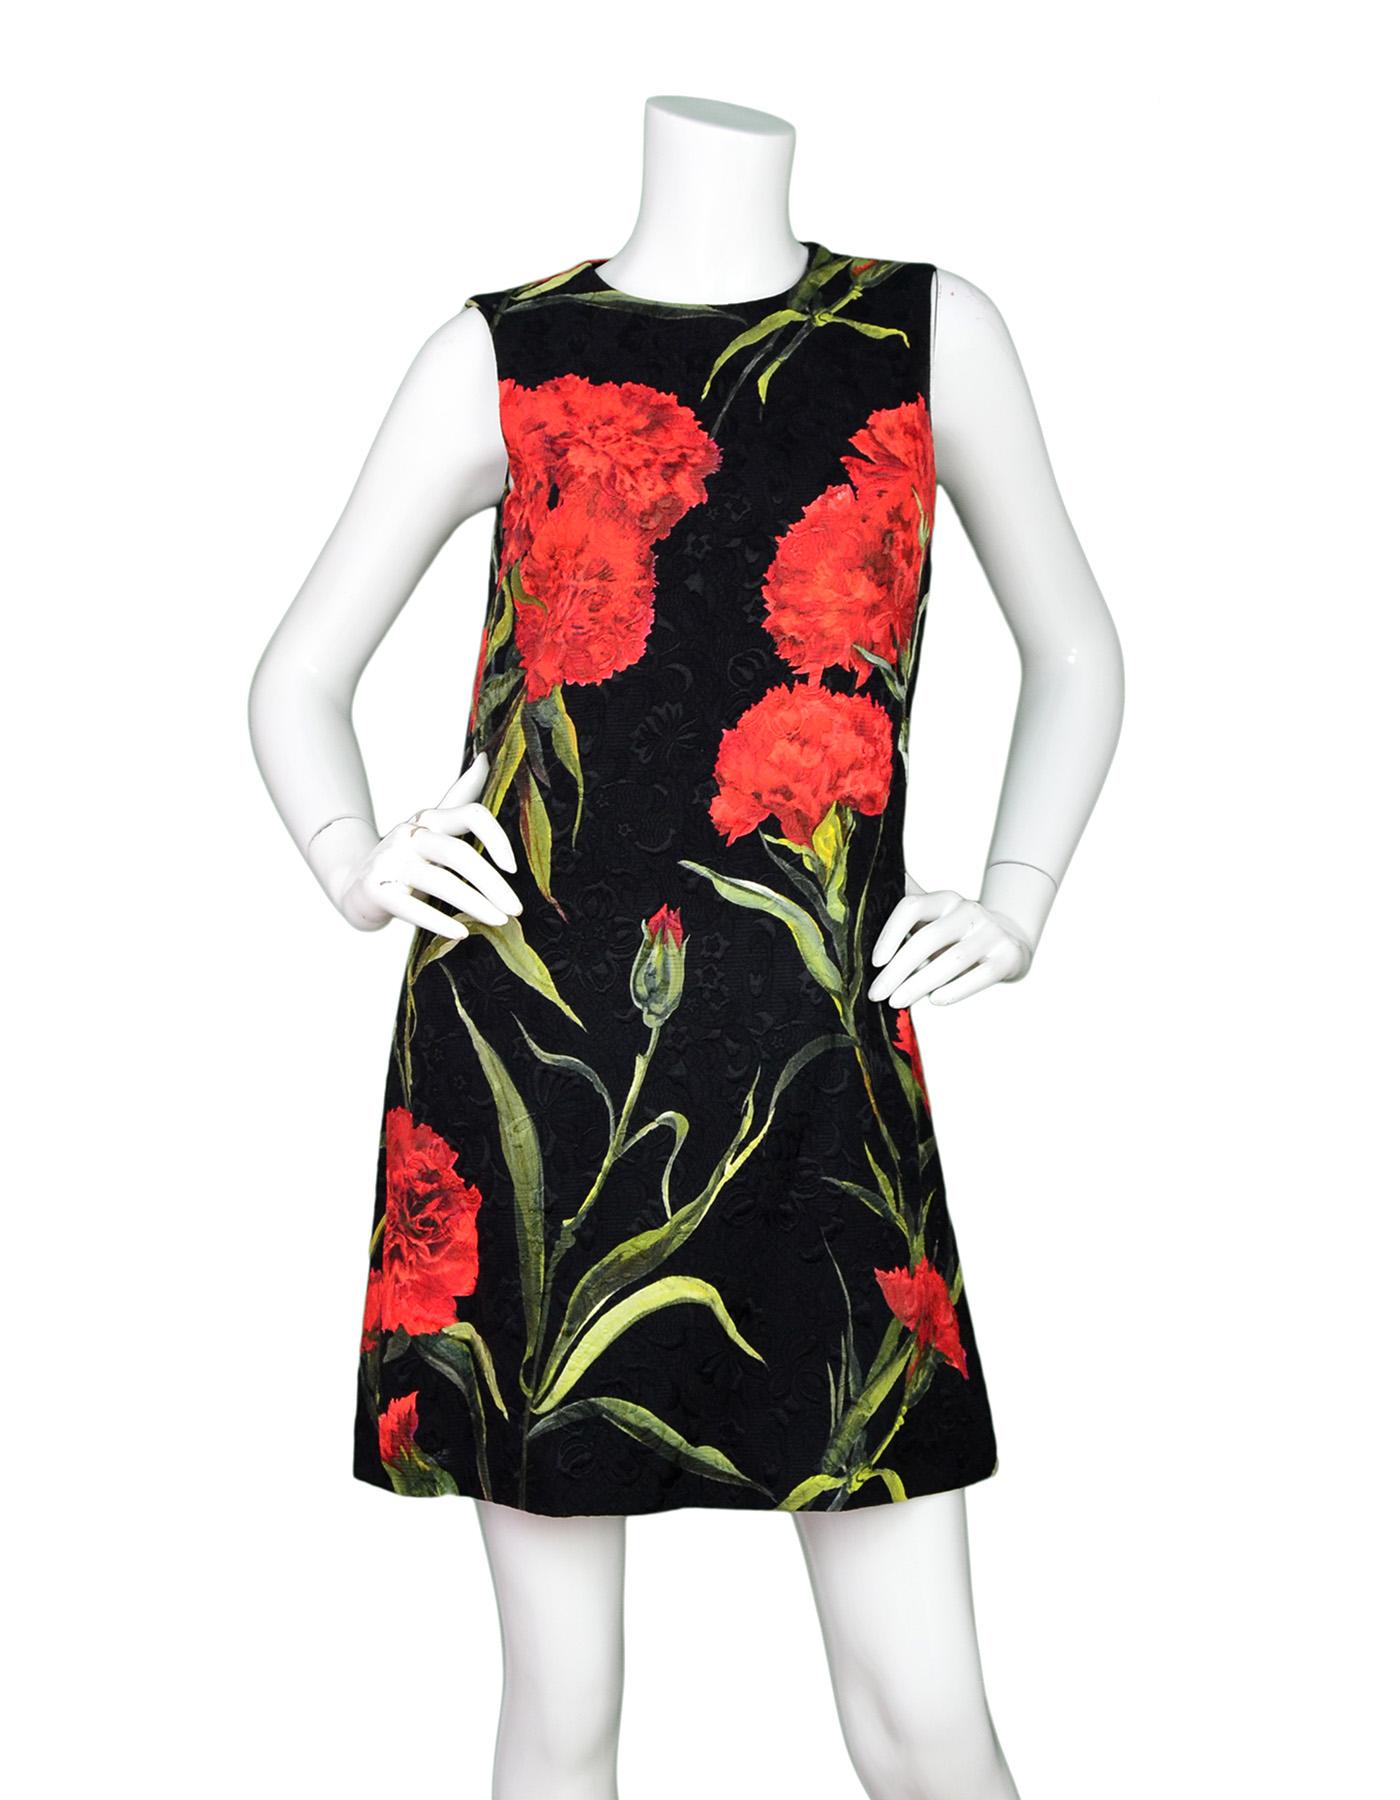 Dolce & Gabbana Red/Black Carnation Floral Brocade Print Sleeveless Shift Dress Sz 40

Made In: Italy
Year of Production: 2015
Color: Black, red, green
Materials: 54% cotton, 34% rayon, 12% silk
Lining: 100% polyester black and white polka